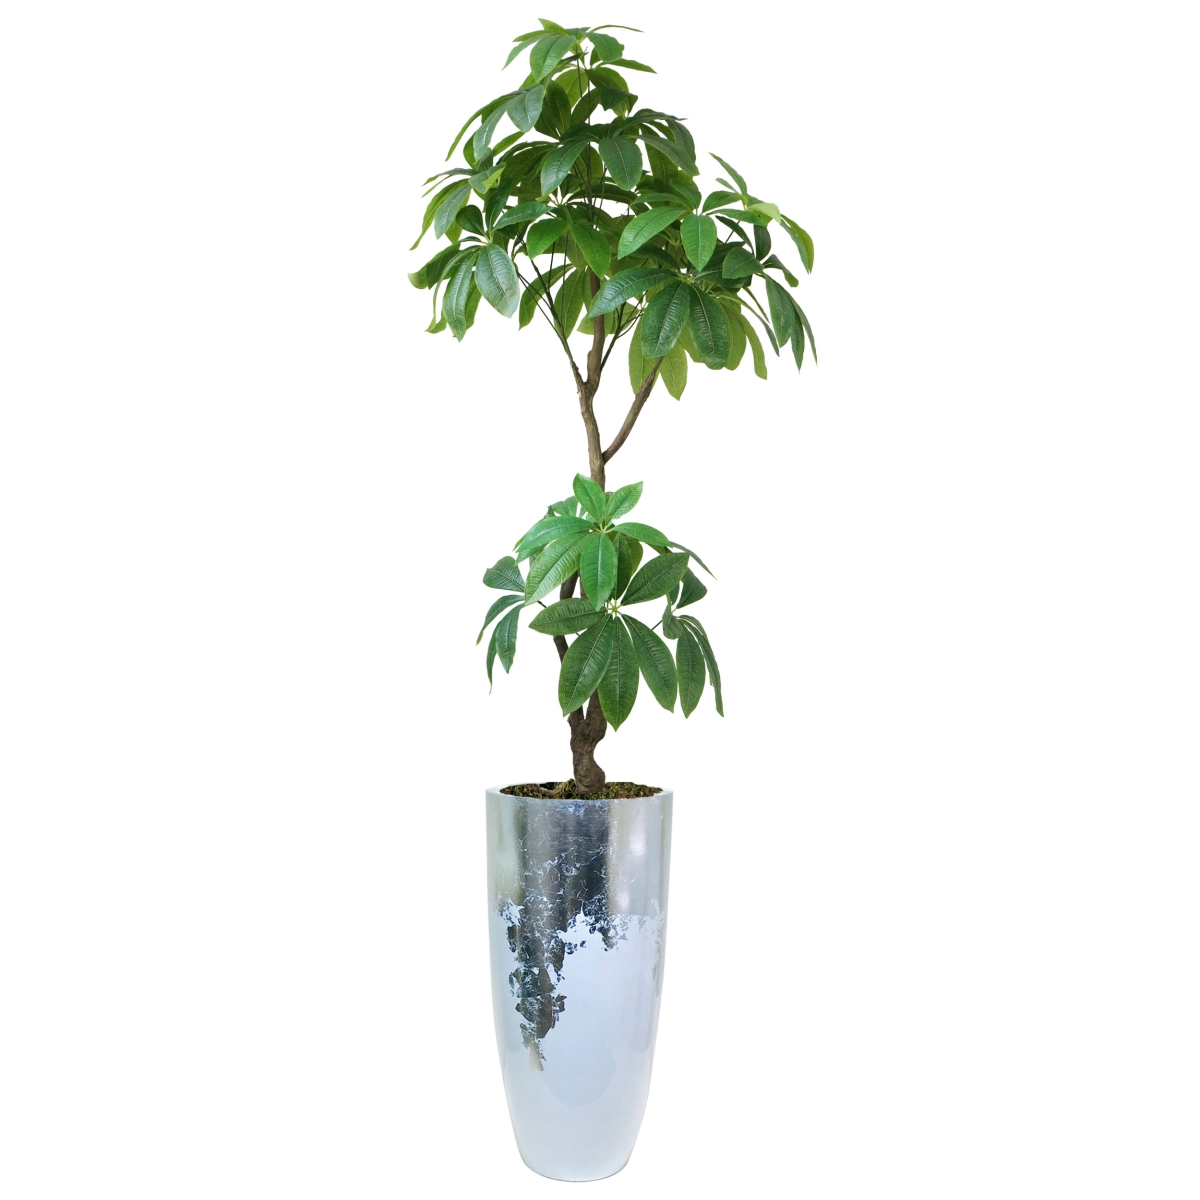 Vhx142220 53.5 In. Indoor & Outdoor Real Touch Pachira Aquatica Plant In Silver Resin Planter